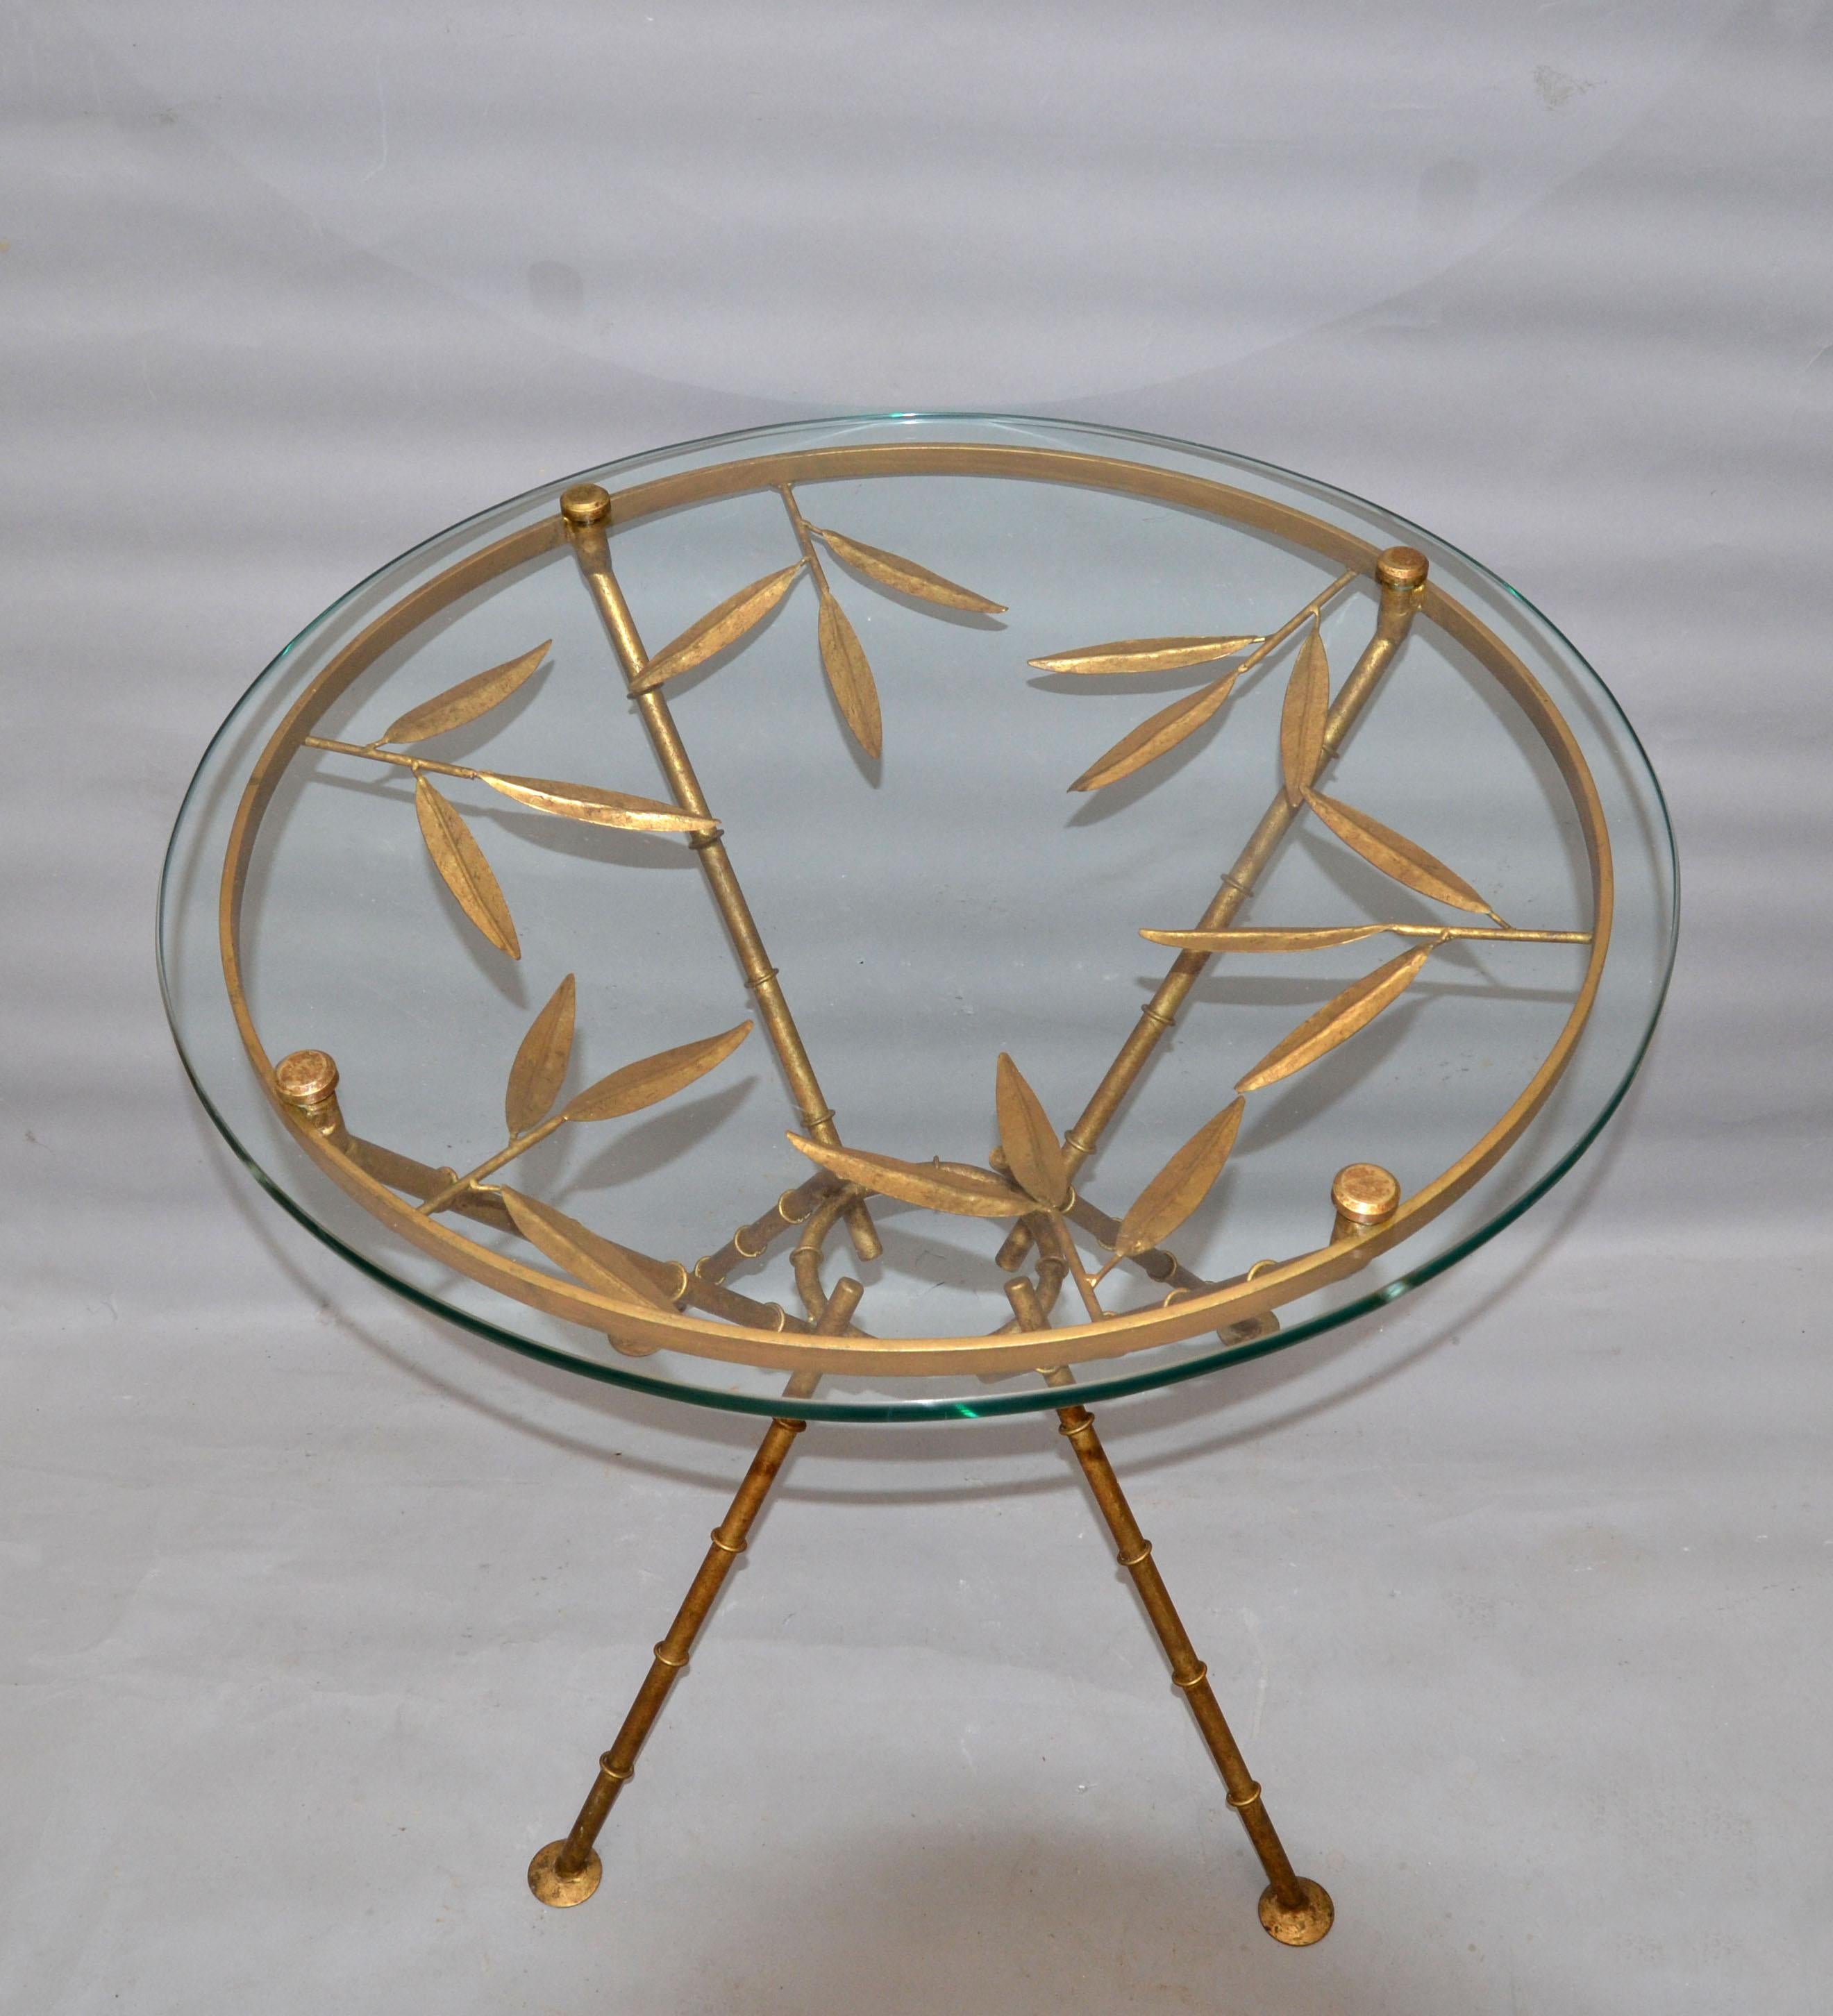 Maison Baguès Style Bronze Faux Bamboo & Leaves Glass Cocktail Table Traditional For Sale 3